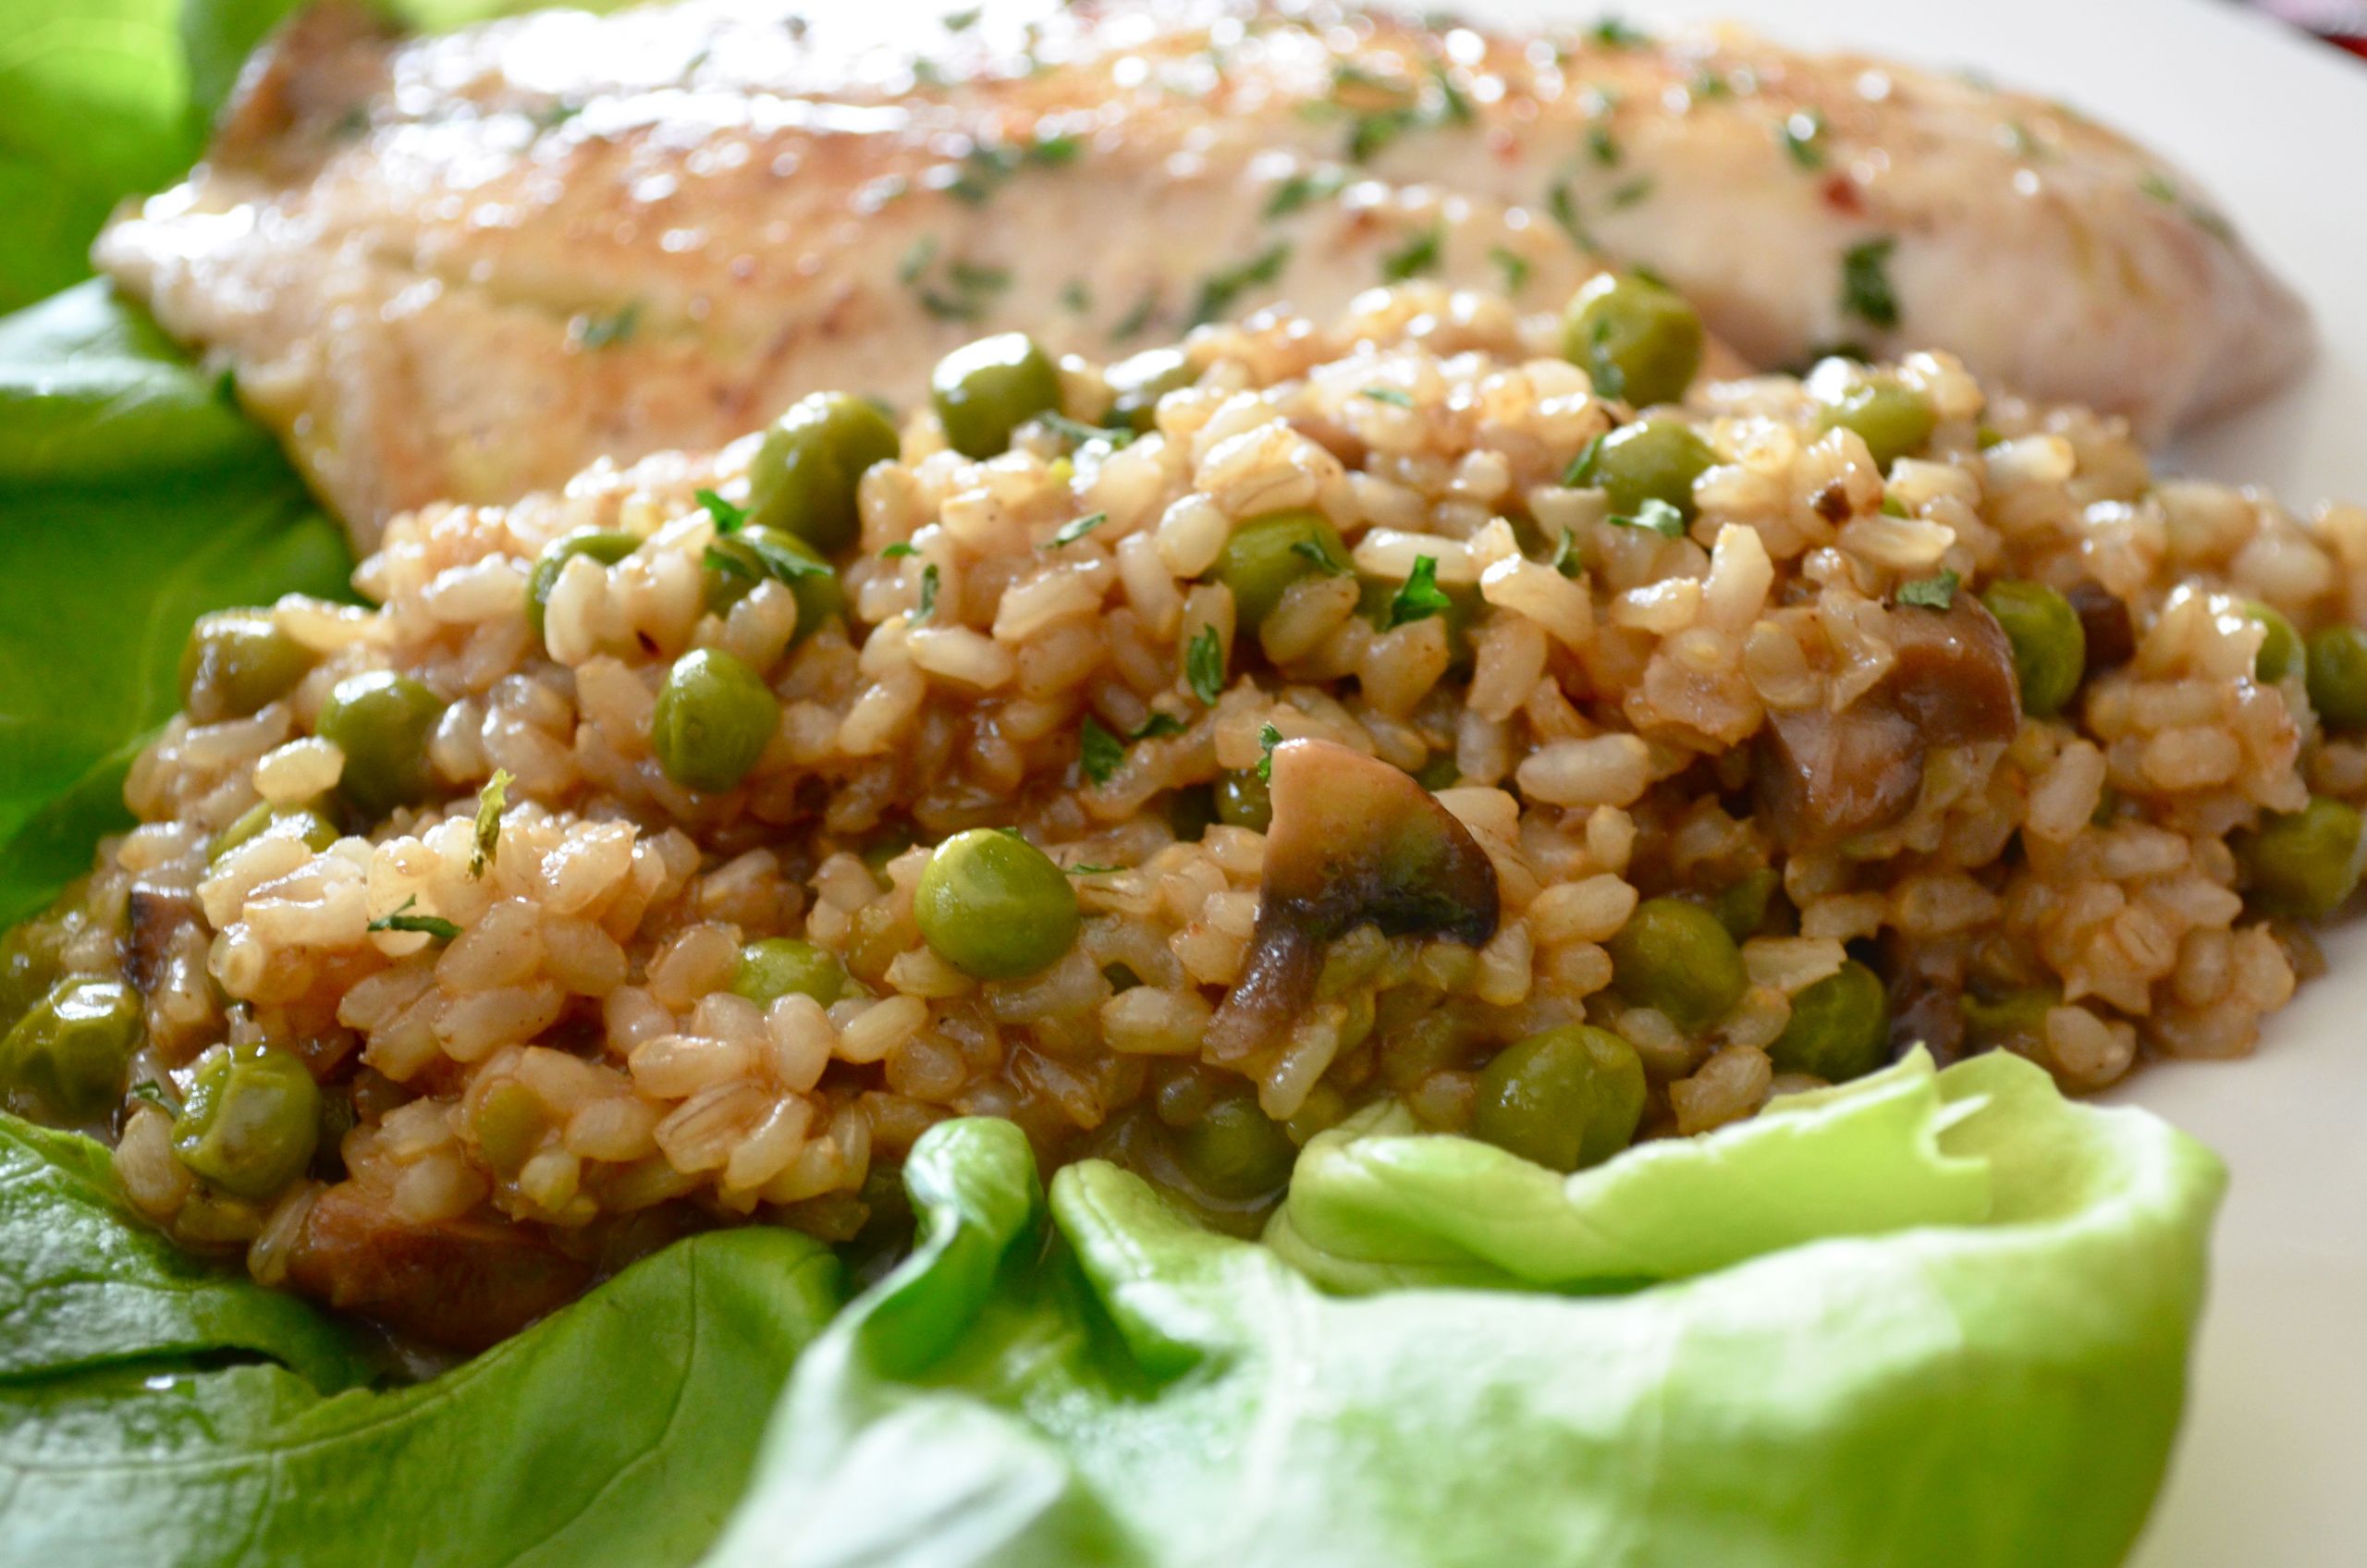 Healthy Brown Rice Recipes
 6 Best Healthy Brown Rice Recipes